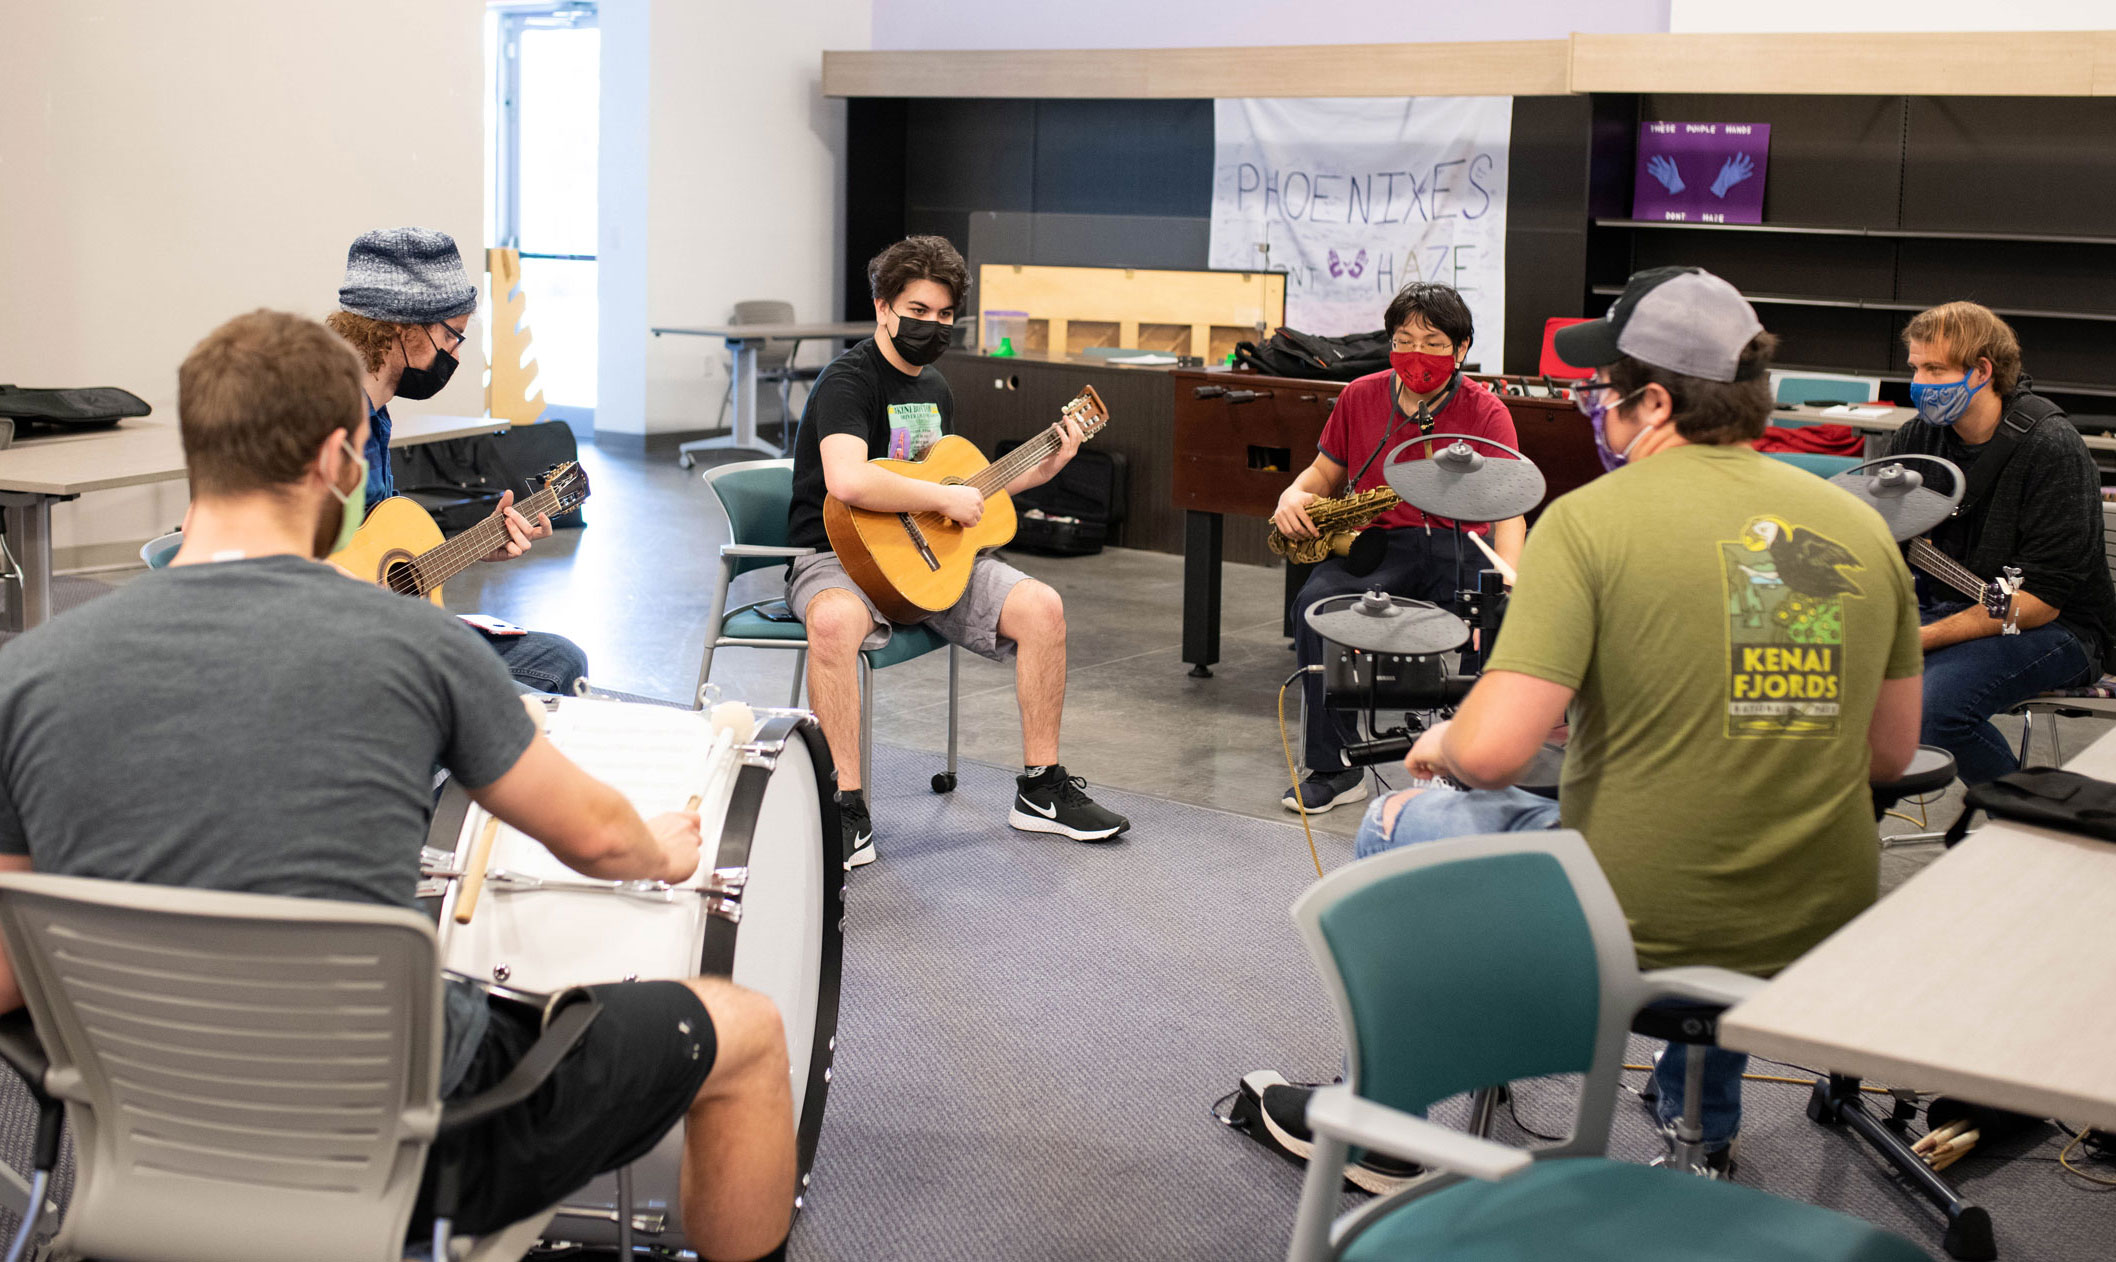 The Music Club has weekly jam sessions at the Nest.